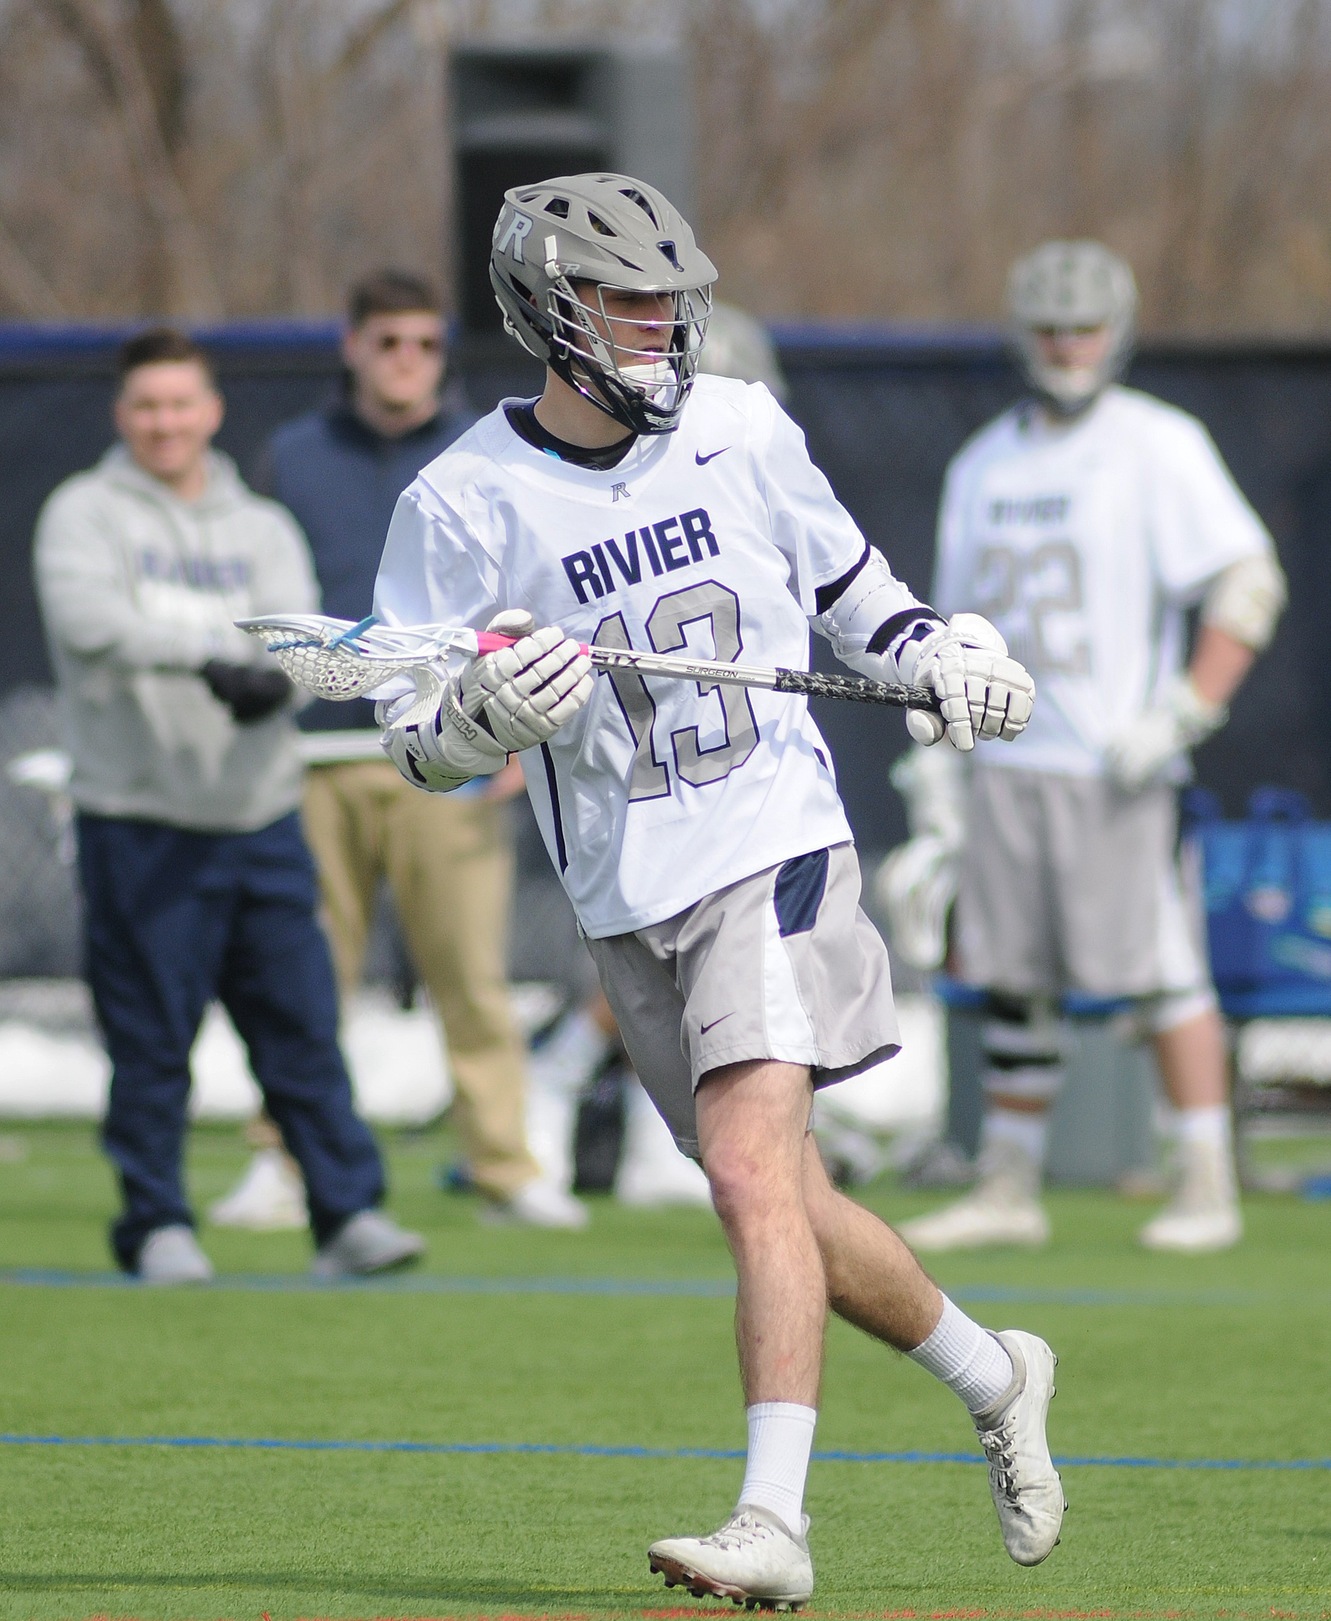 Men's Lacrosse: Raiders earn second win at home against the Mariners, 20-6